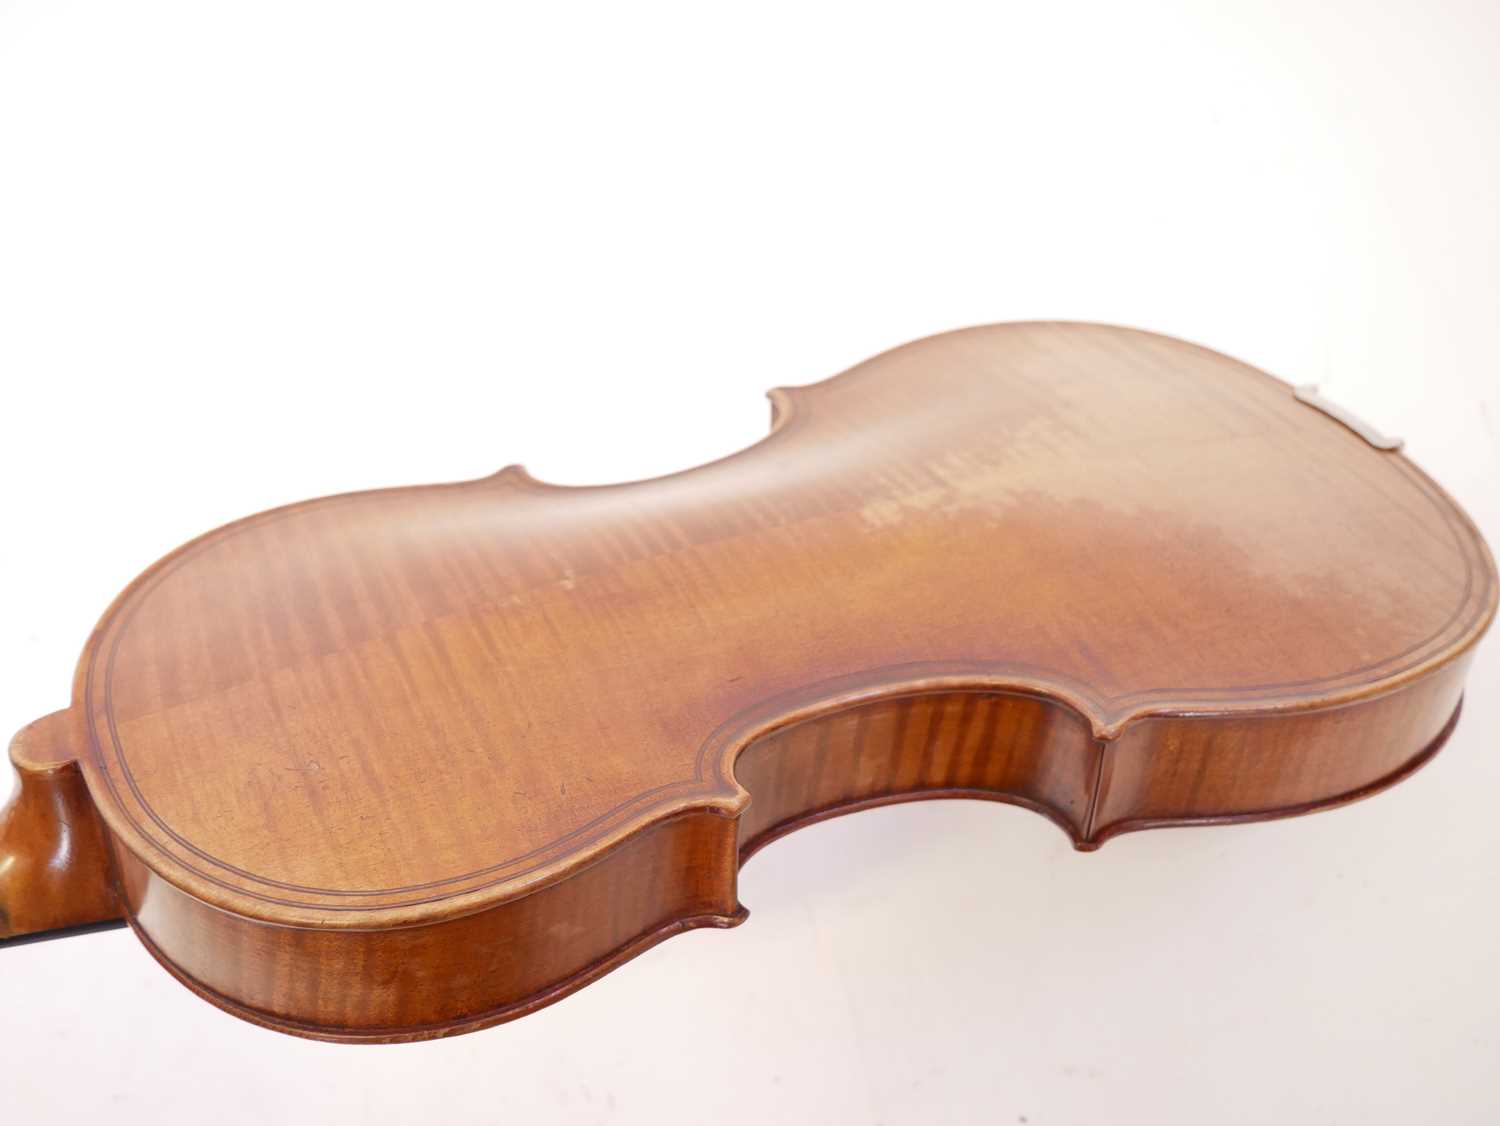 Maggini style 4/4 violin in case with two bows - Image 4 of 12